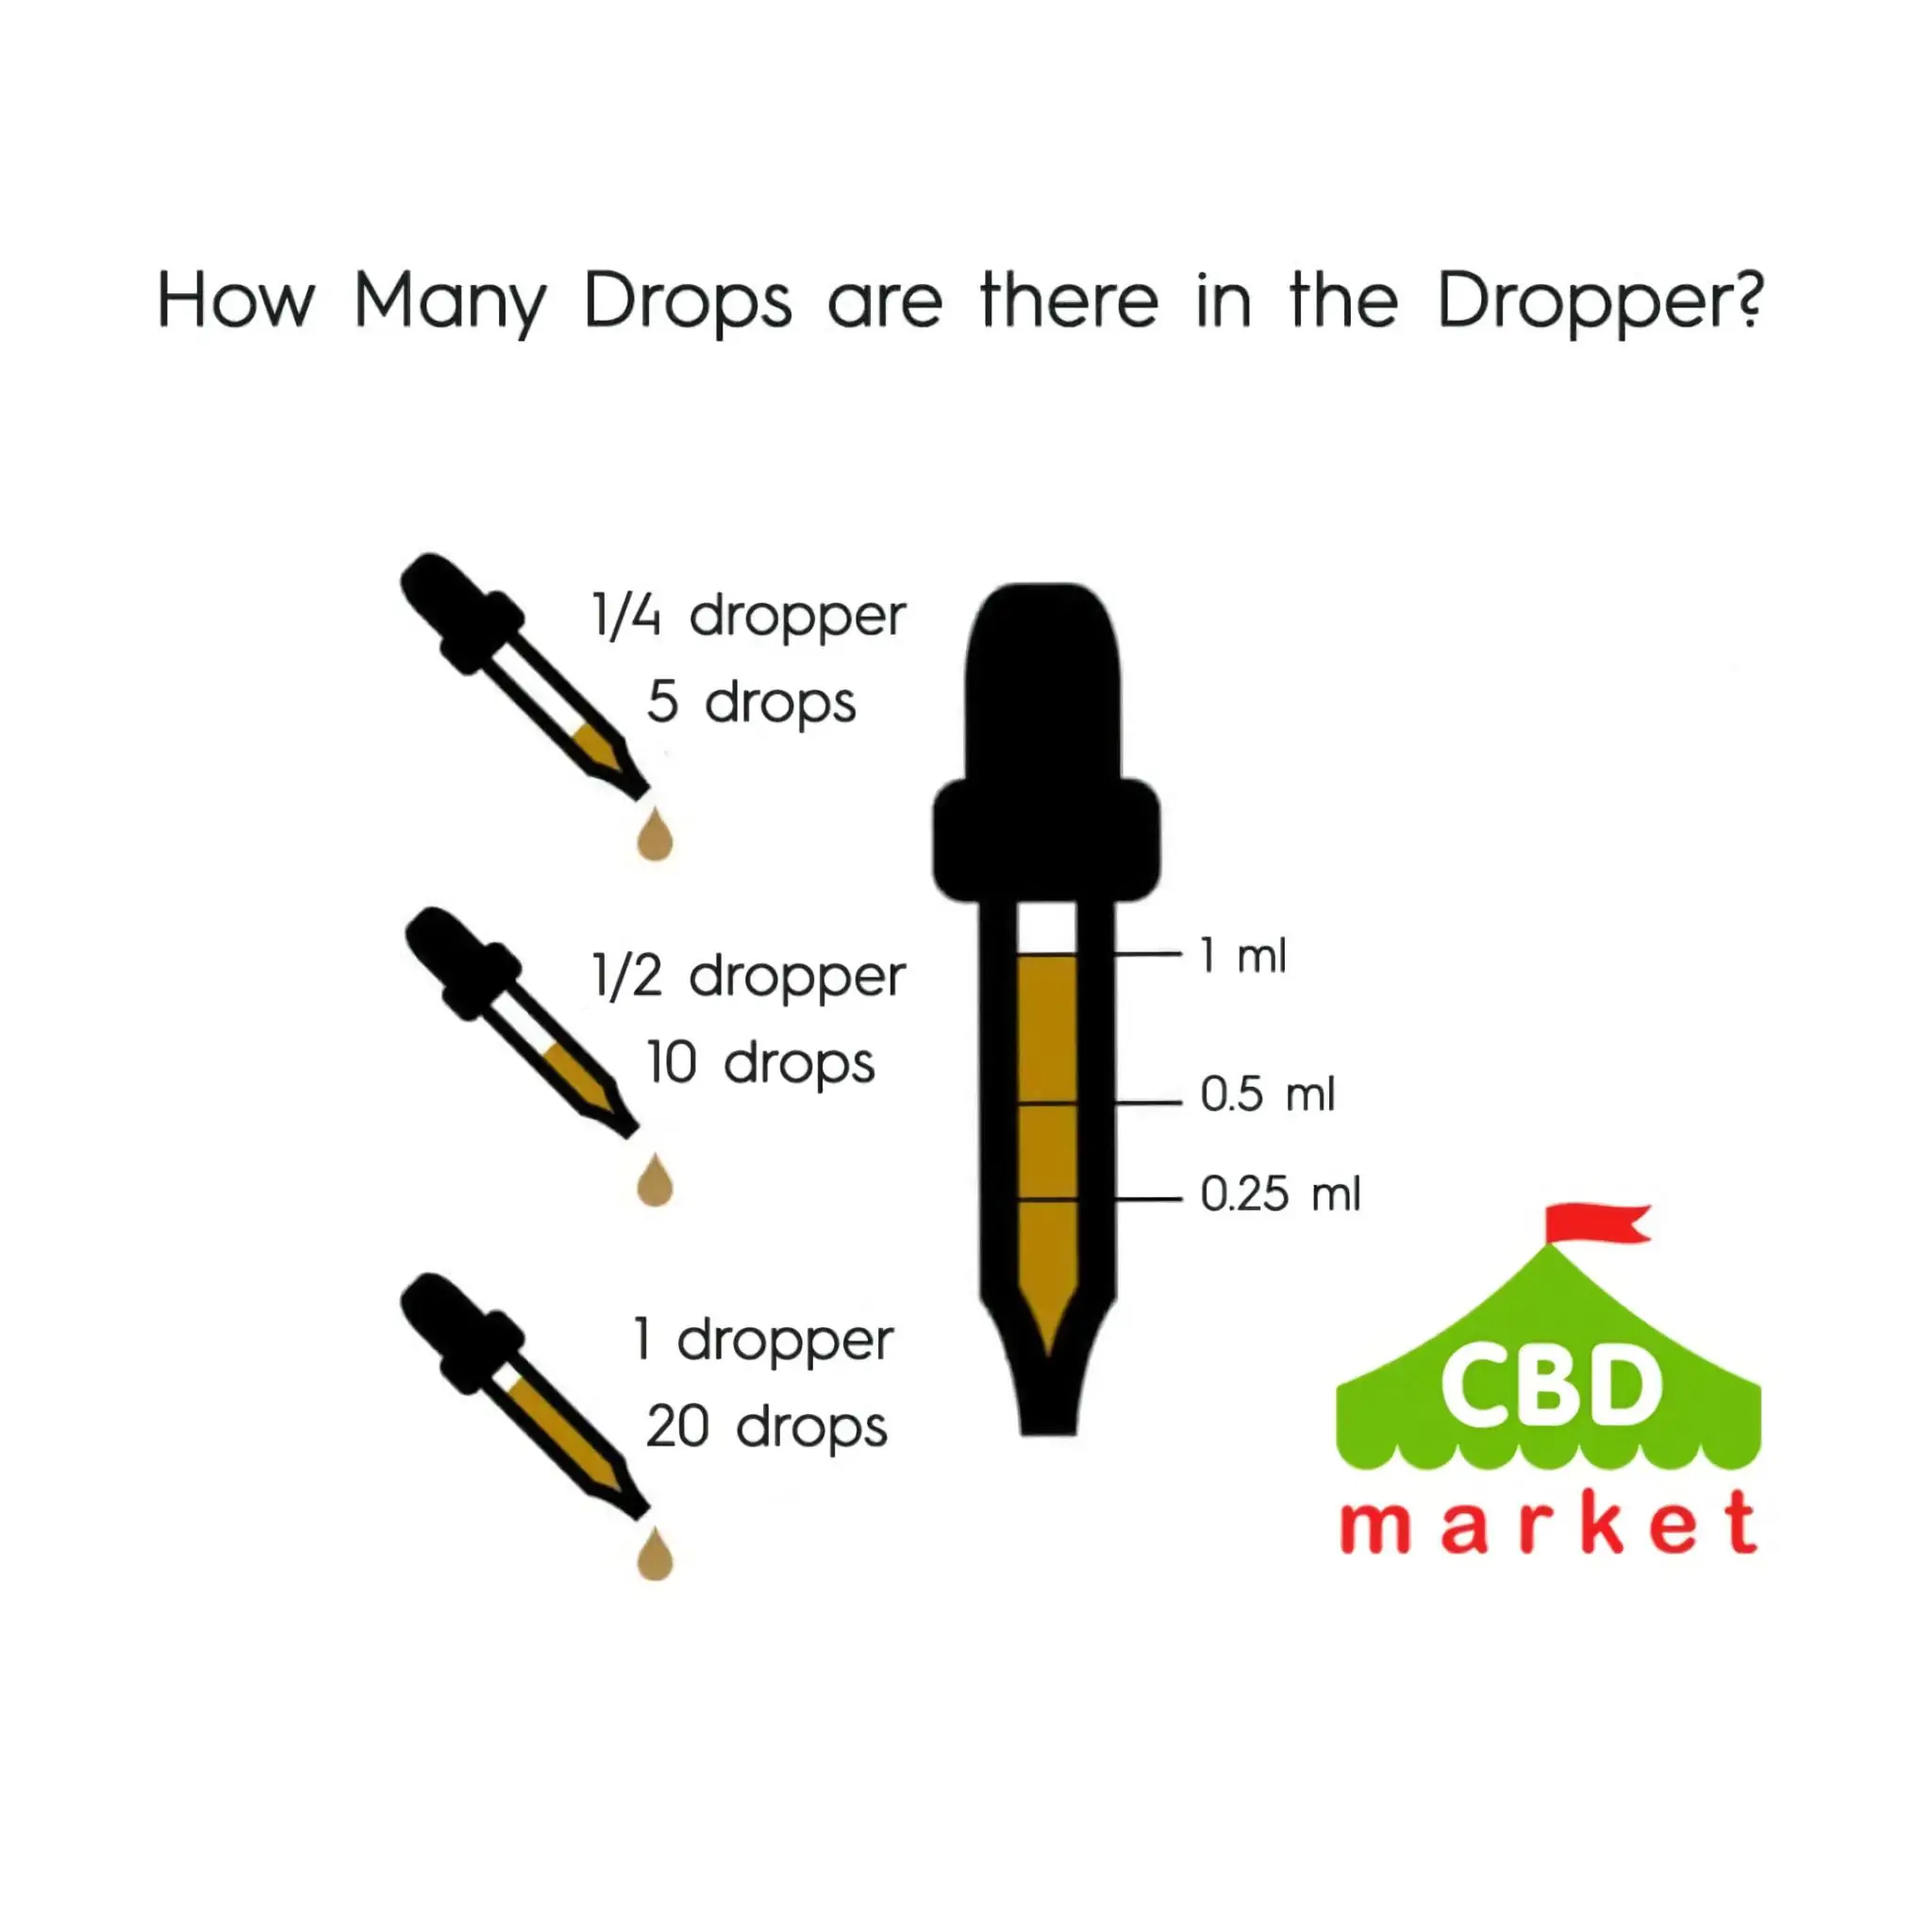 How many drops are there in the full dropper with CBD oil?